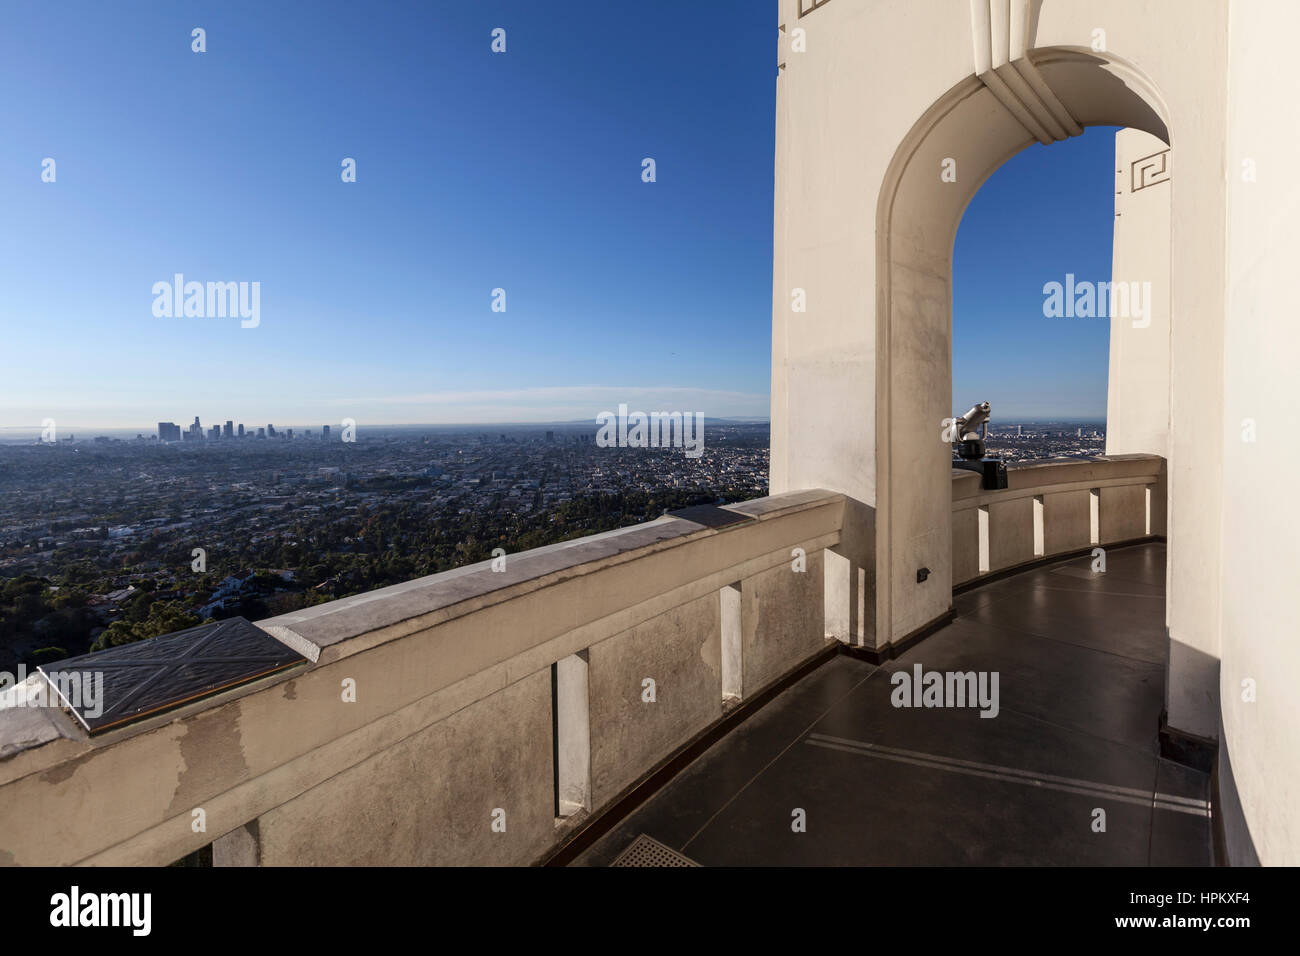 Los Angeles, California, USA - November 2, 2013:  Downtown skyline and arched walk way at LA's Griffith Park Observatory. Stock Photo